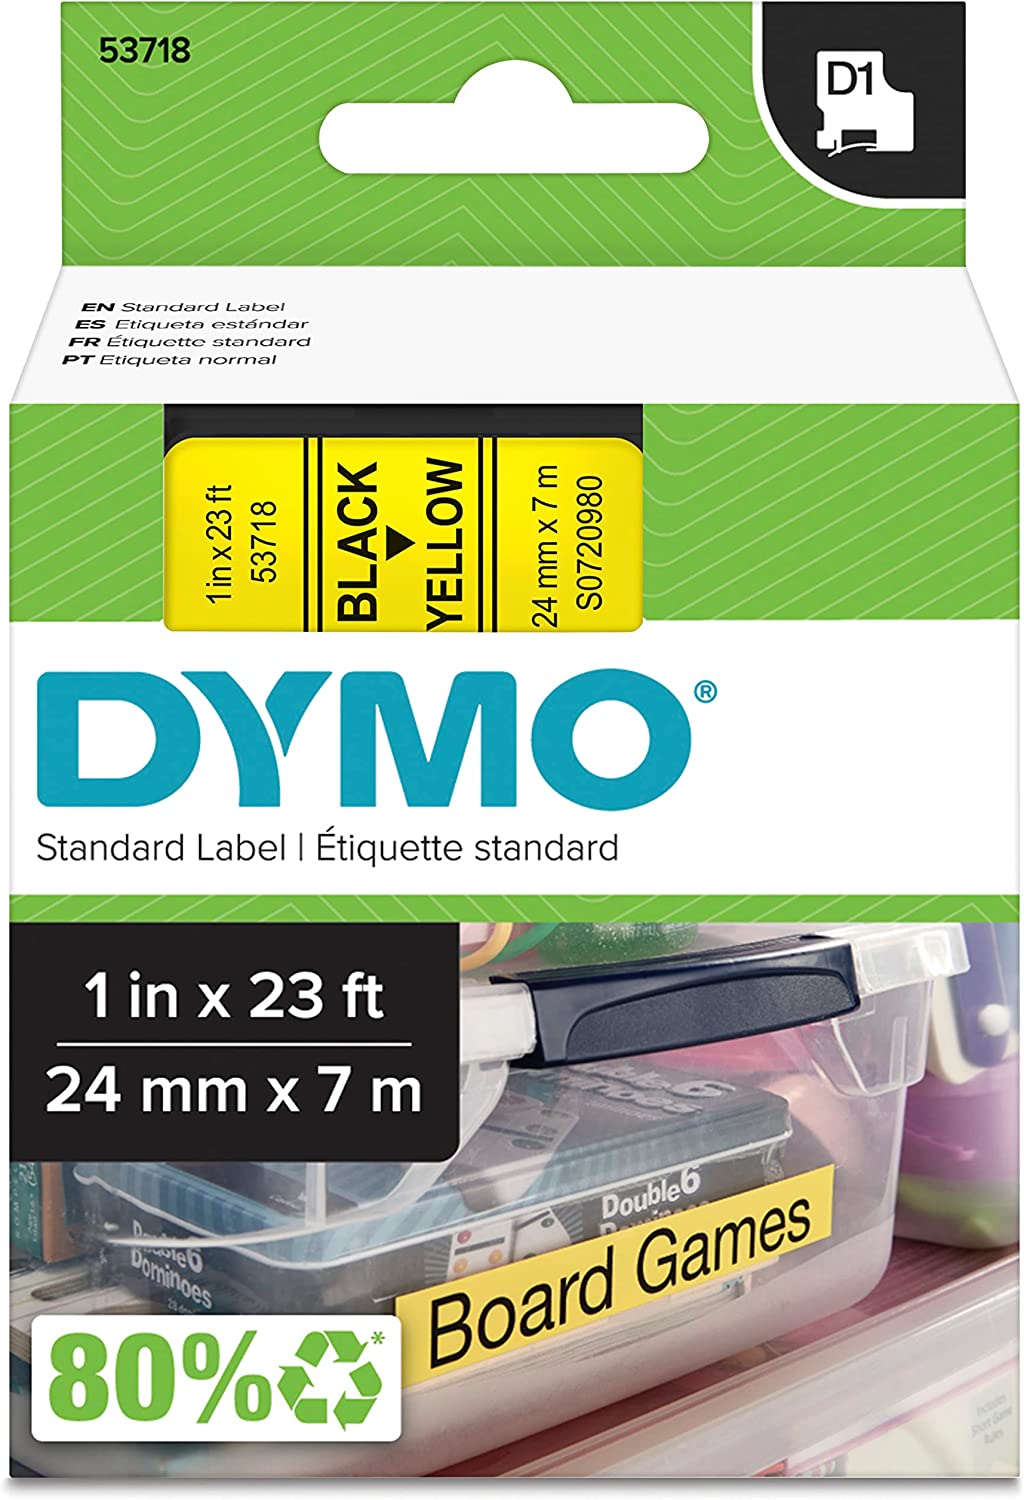 DYMO Standard D1 Labeling Tape for LabelManager Label Makers, Black print on Yellow tape, 1" W X 23' L, 1 cartridge (53718), DYMO Authentic 1" Black on Yellow